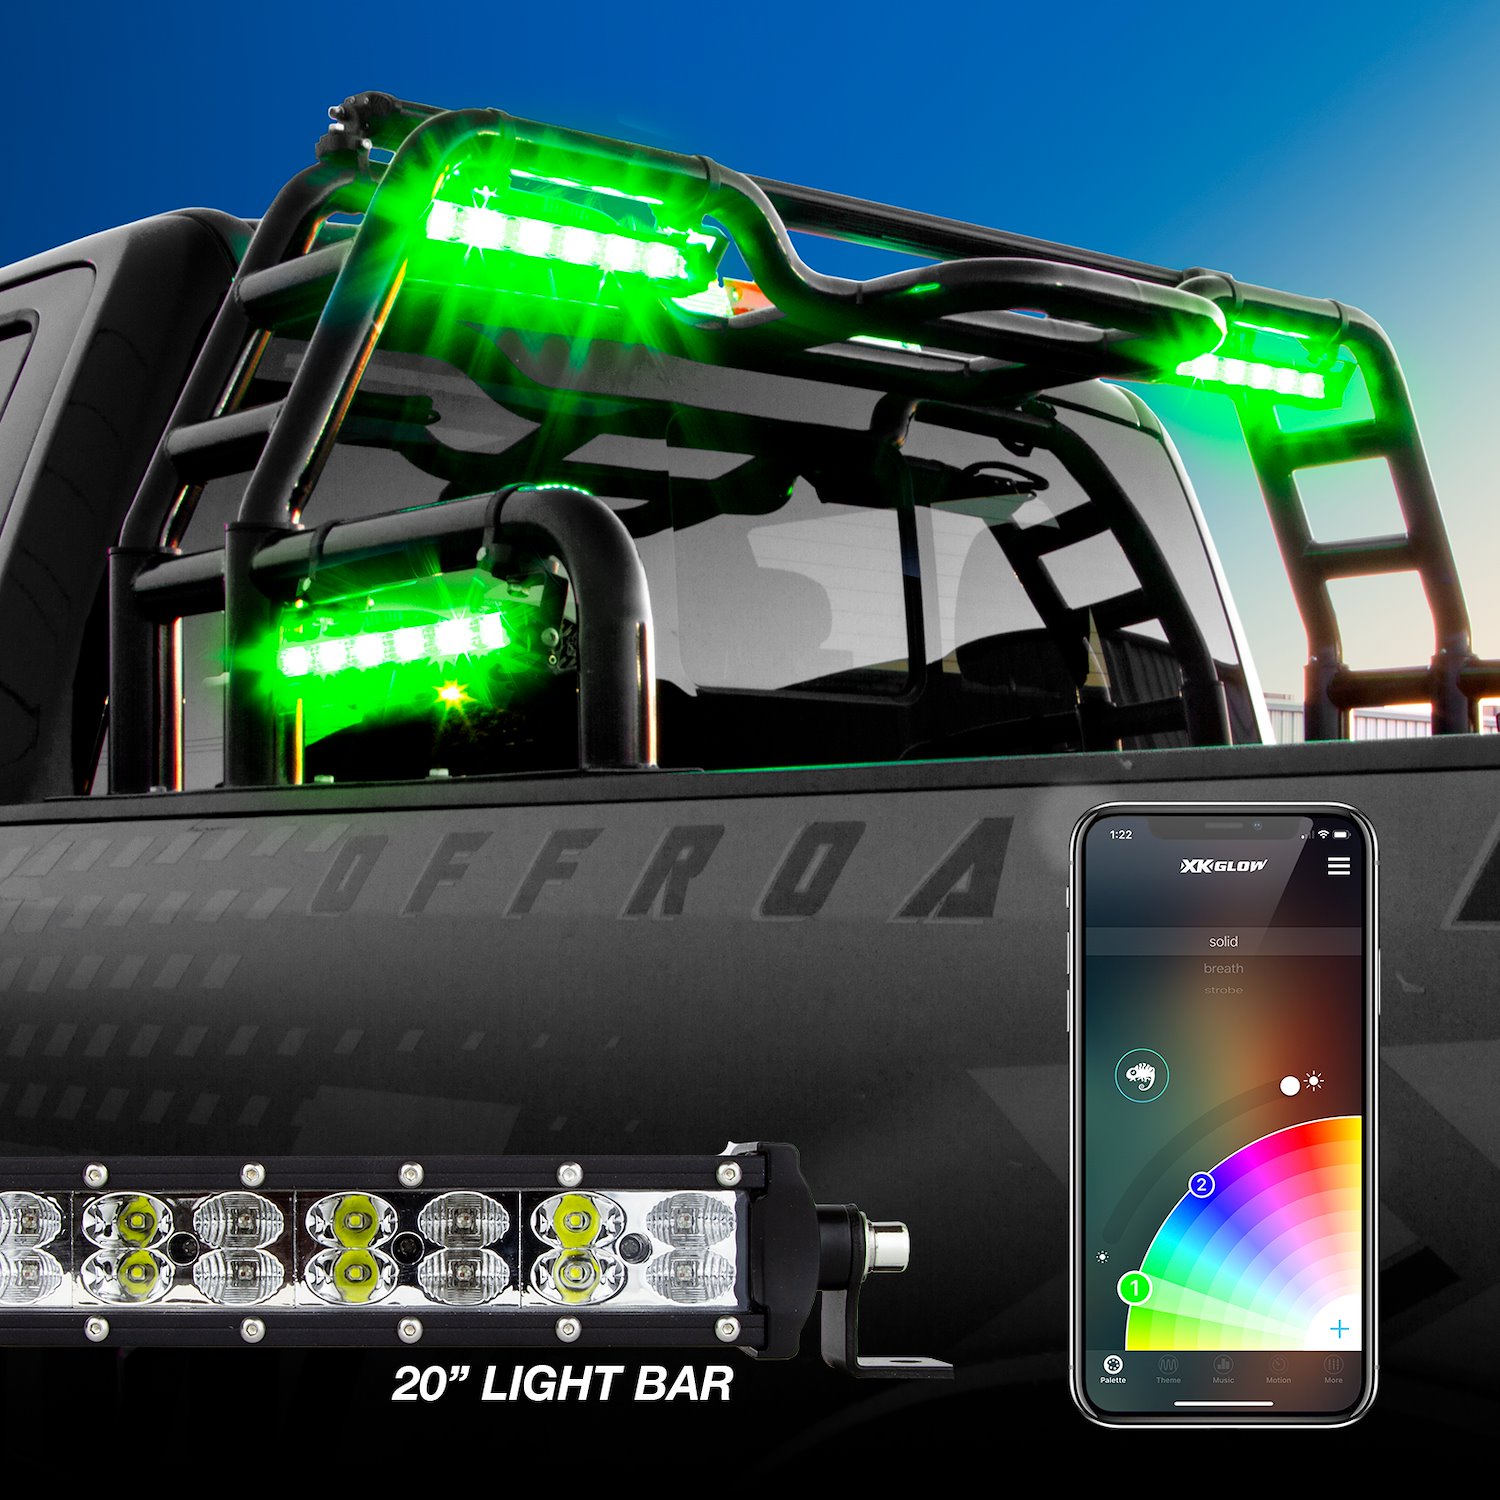 XK-BAR-20 20 in. RGBW Light Bar, High-Power Offroad Work/Hunting Light, w/Built-in XKCHROME Bluetooth Controller, Universal Fit